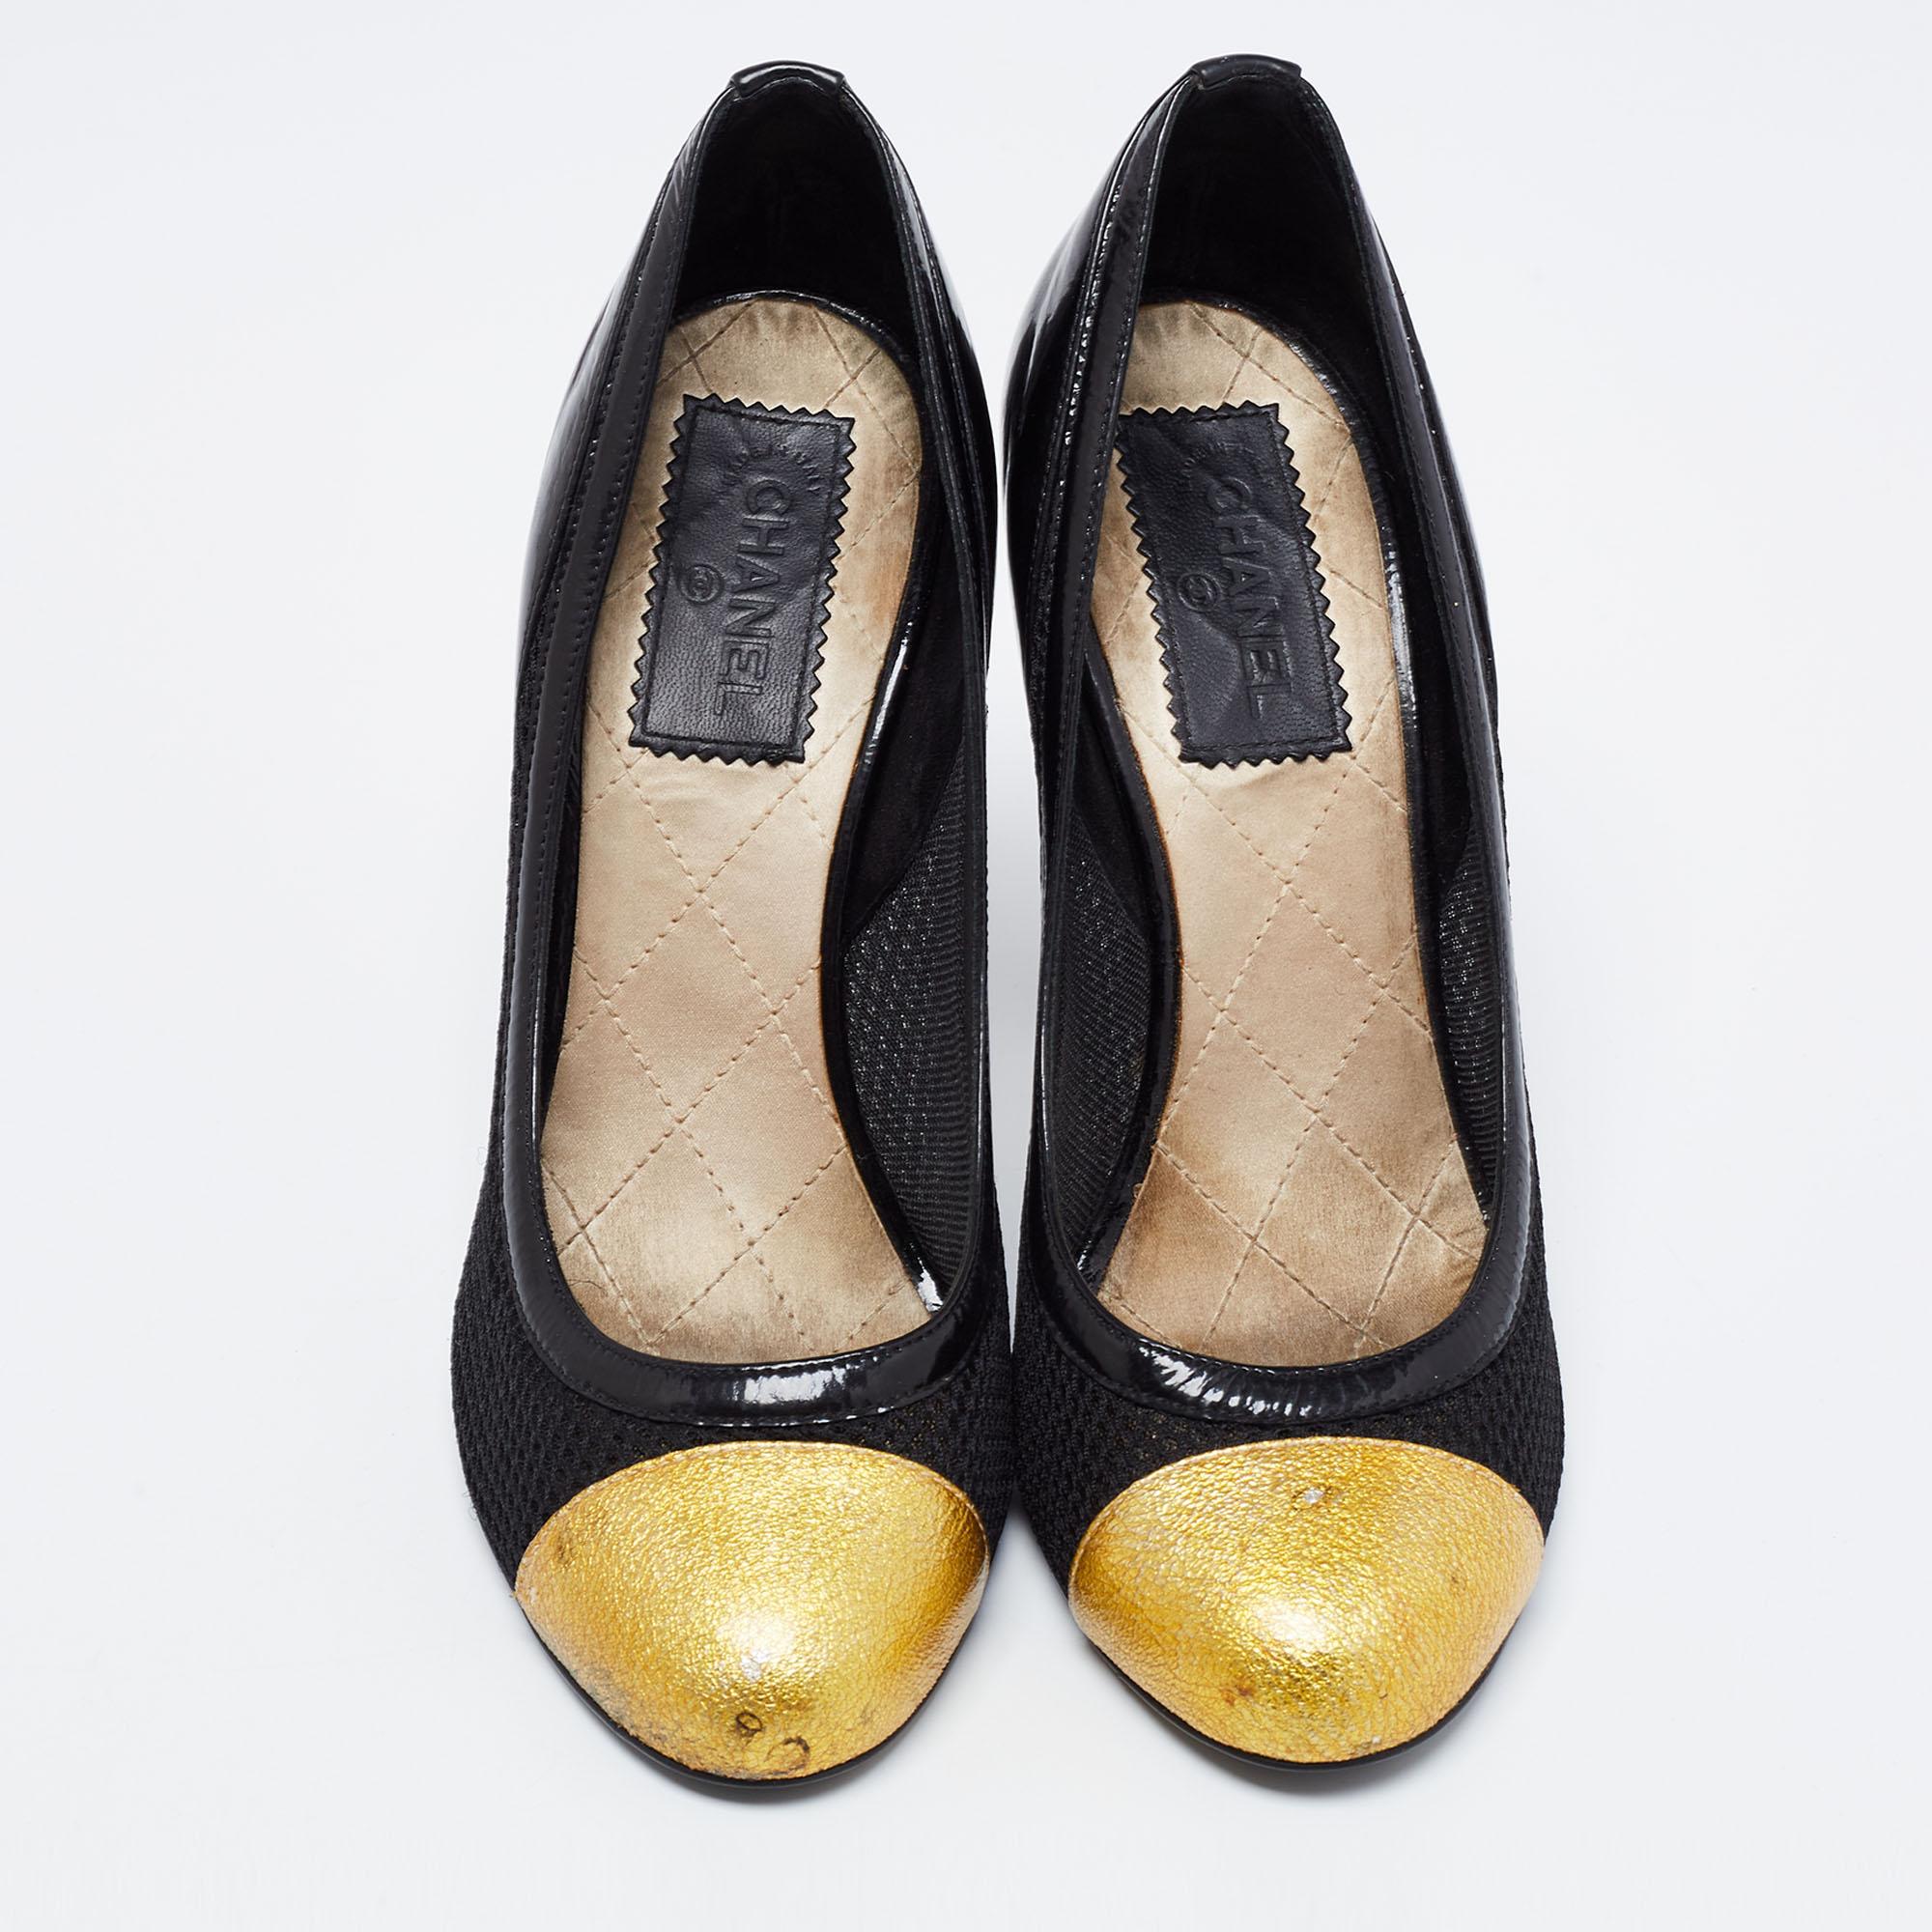 These fabulous pumps from Chanel will lend a luxurious appeal to your looks. They are crafted from mesh, patent, and textured leather. These pumps come equipped with comfortable leather-lined insoles and stand tall on 10.5 cm heels.

